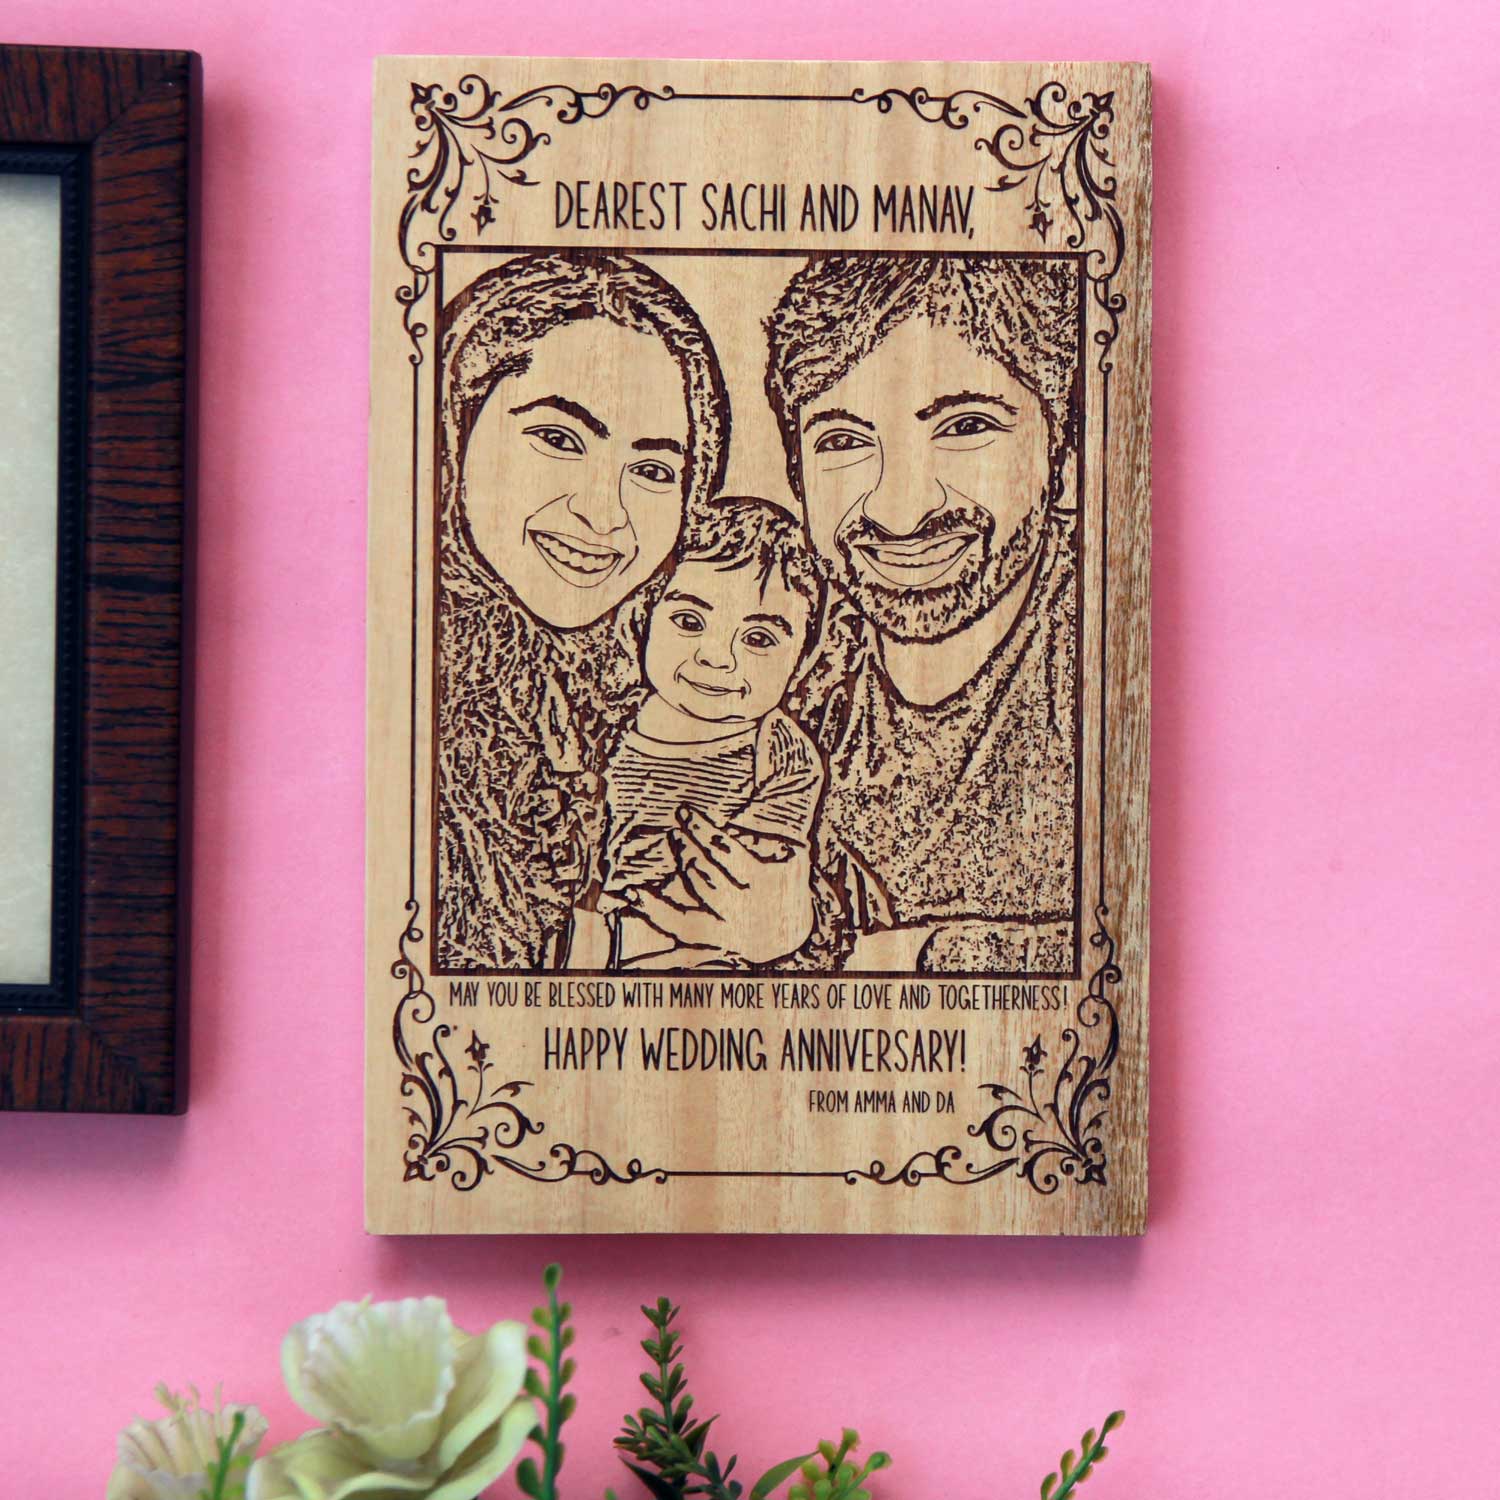 Personalized Family Portrait Engraved In Wood | Anniversary Gift For Husband & Wife